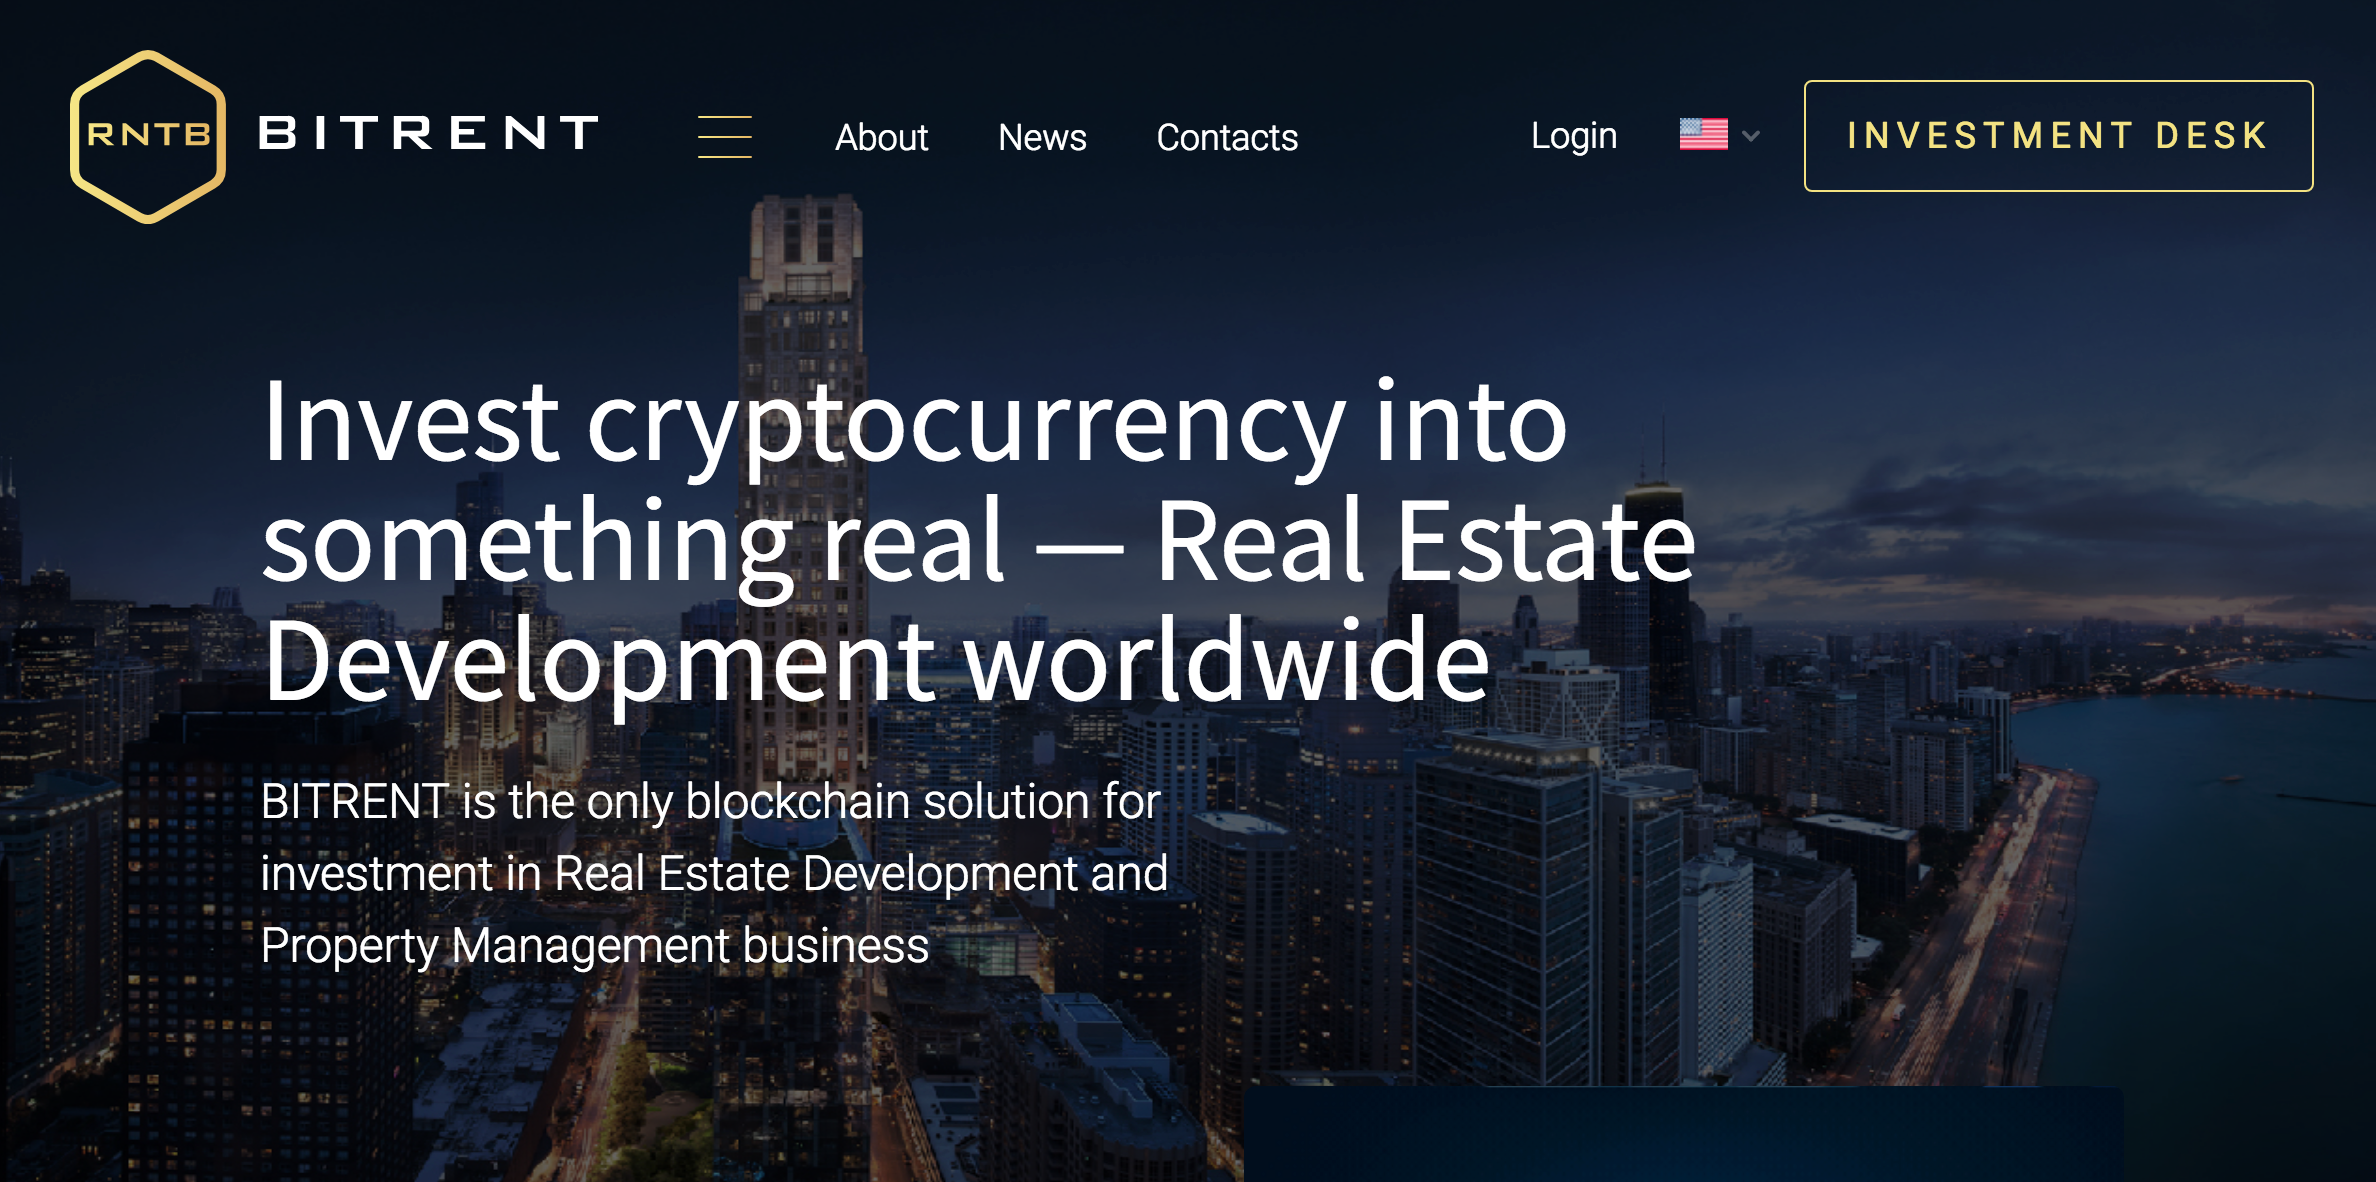 Cryptocurrency real estate development forex brokers regulated by cysec exams